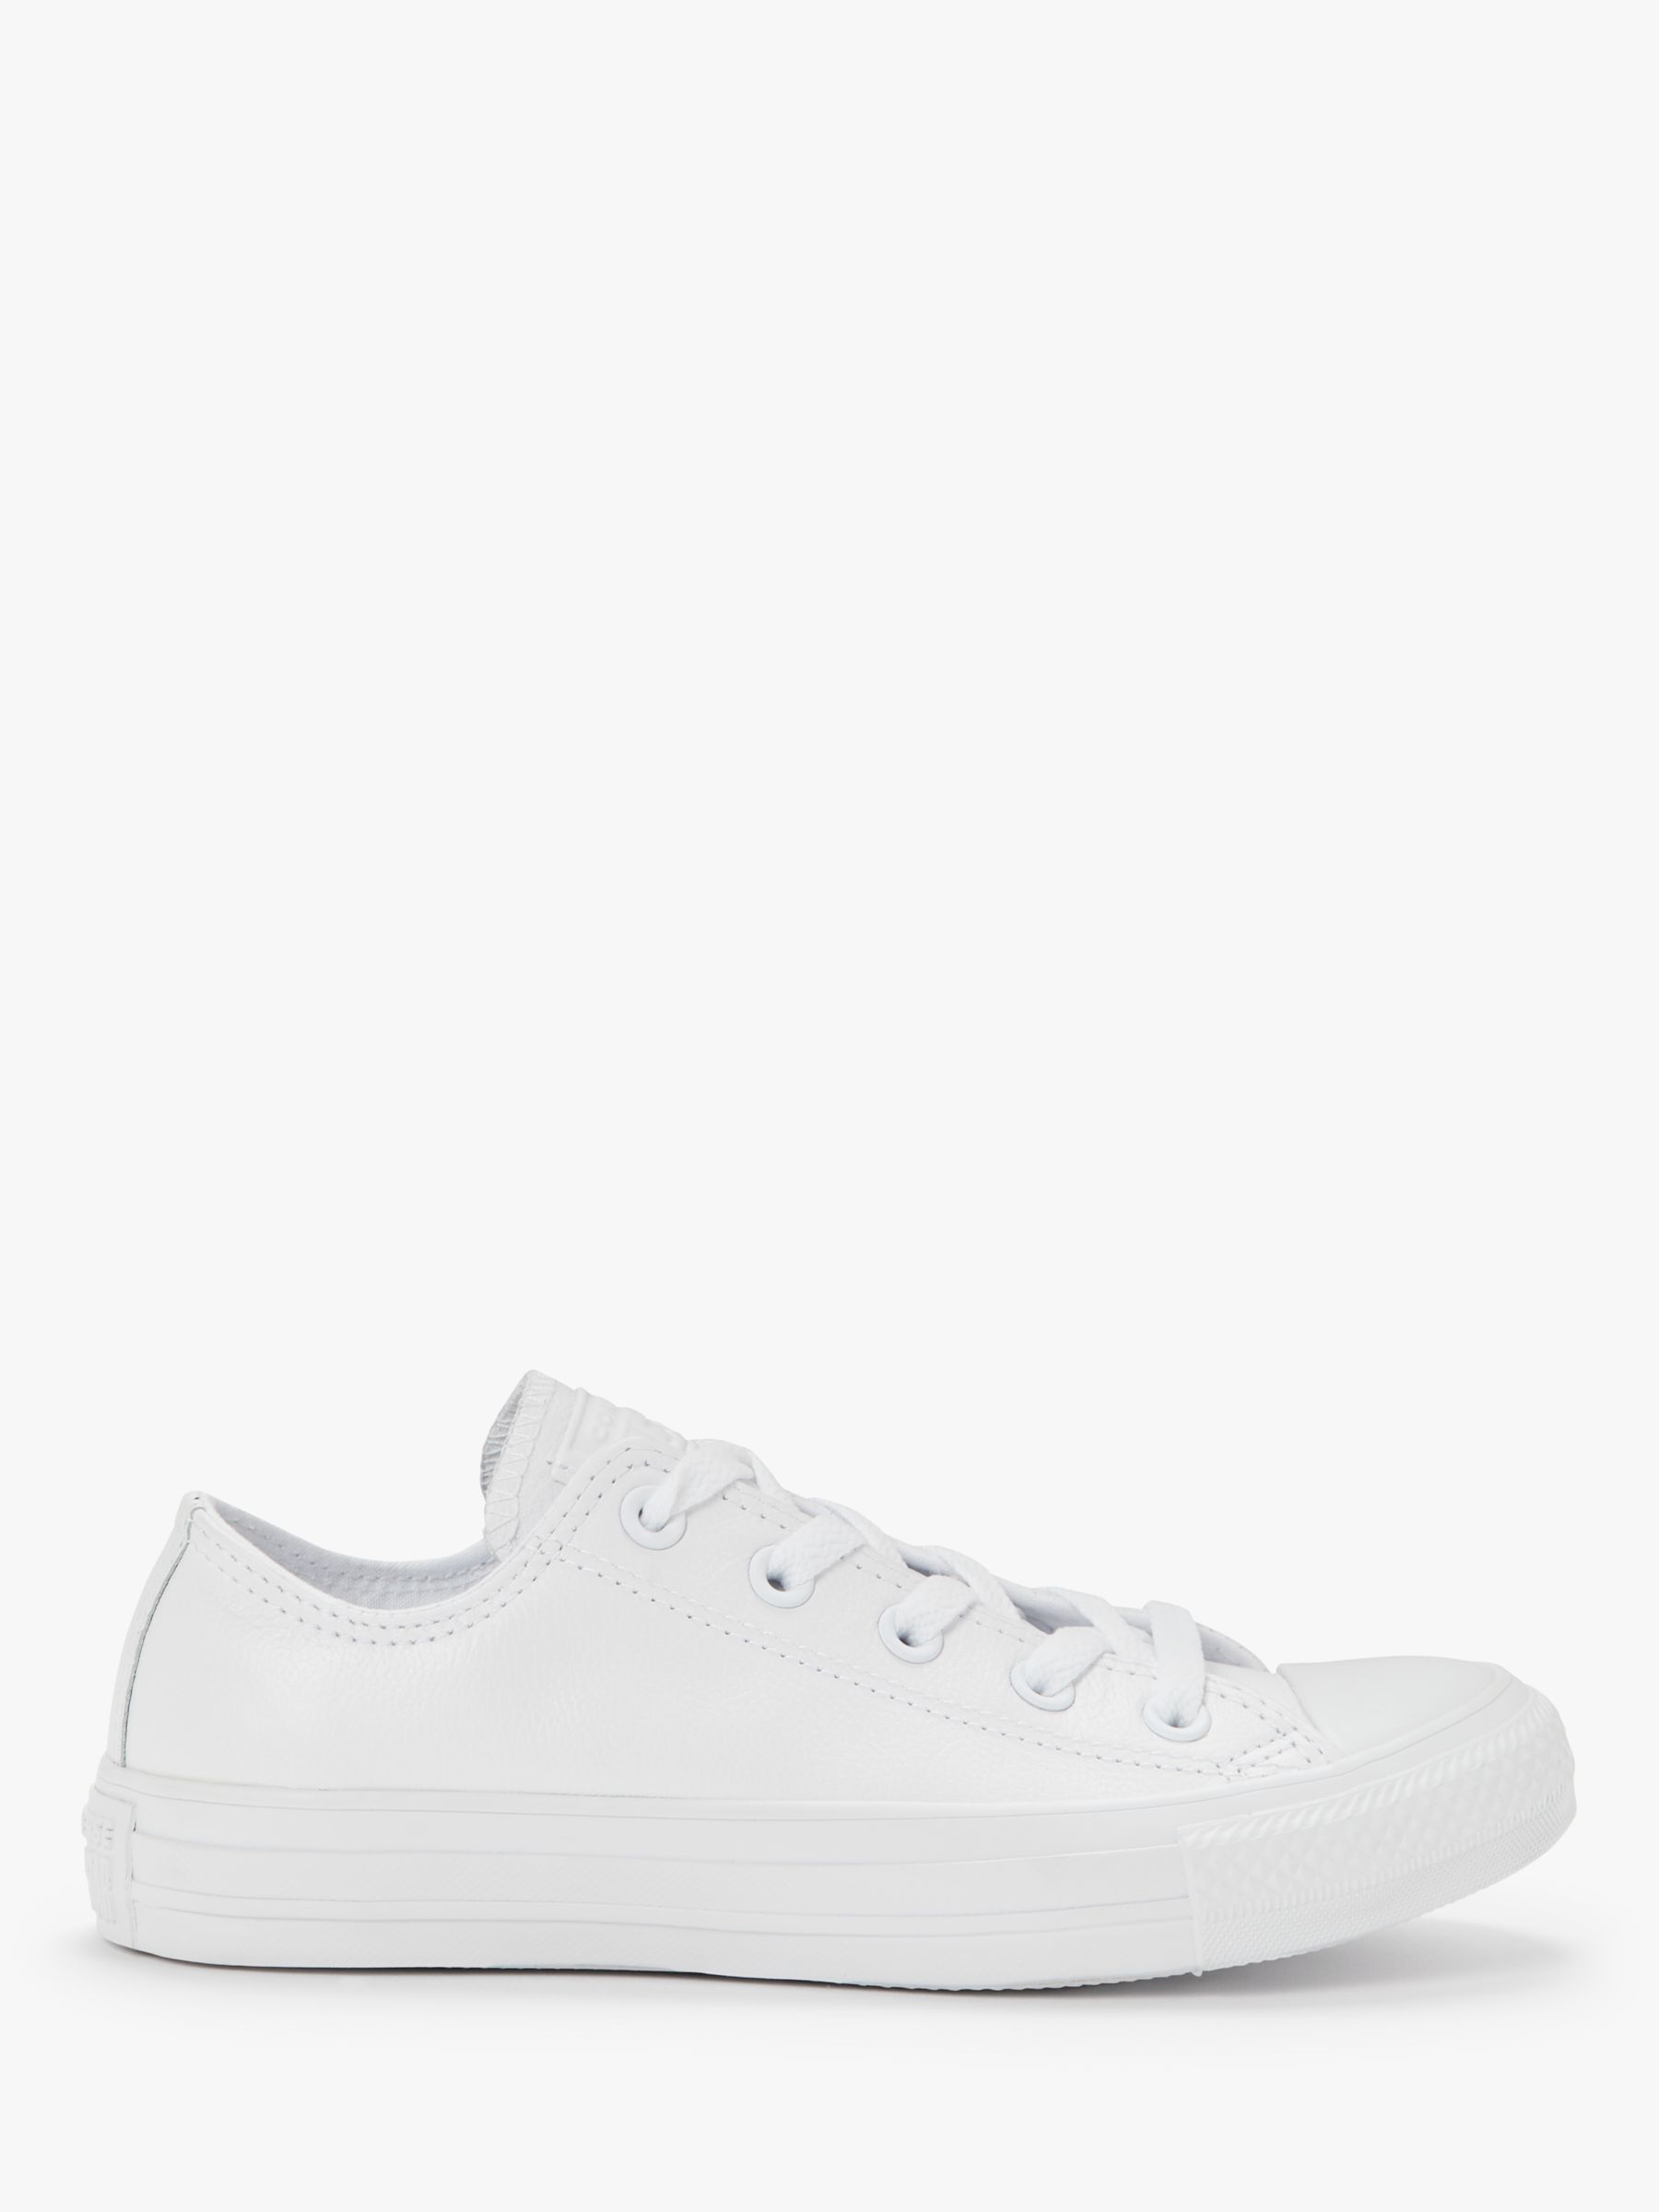 womens white converse trainers